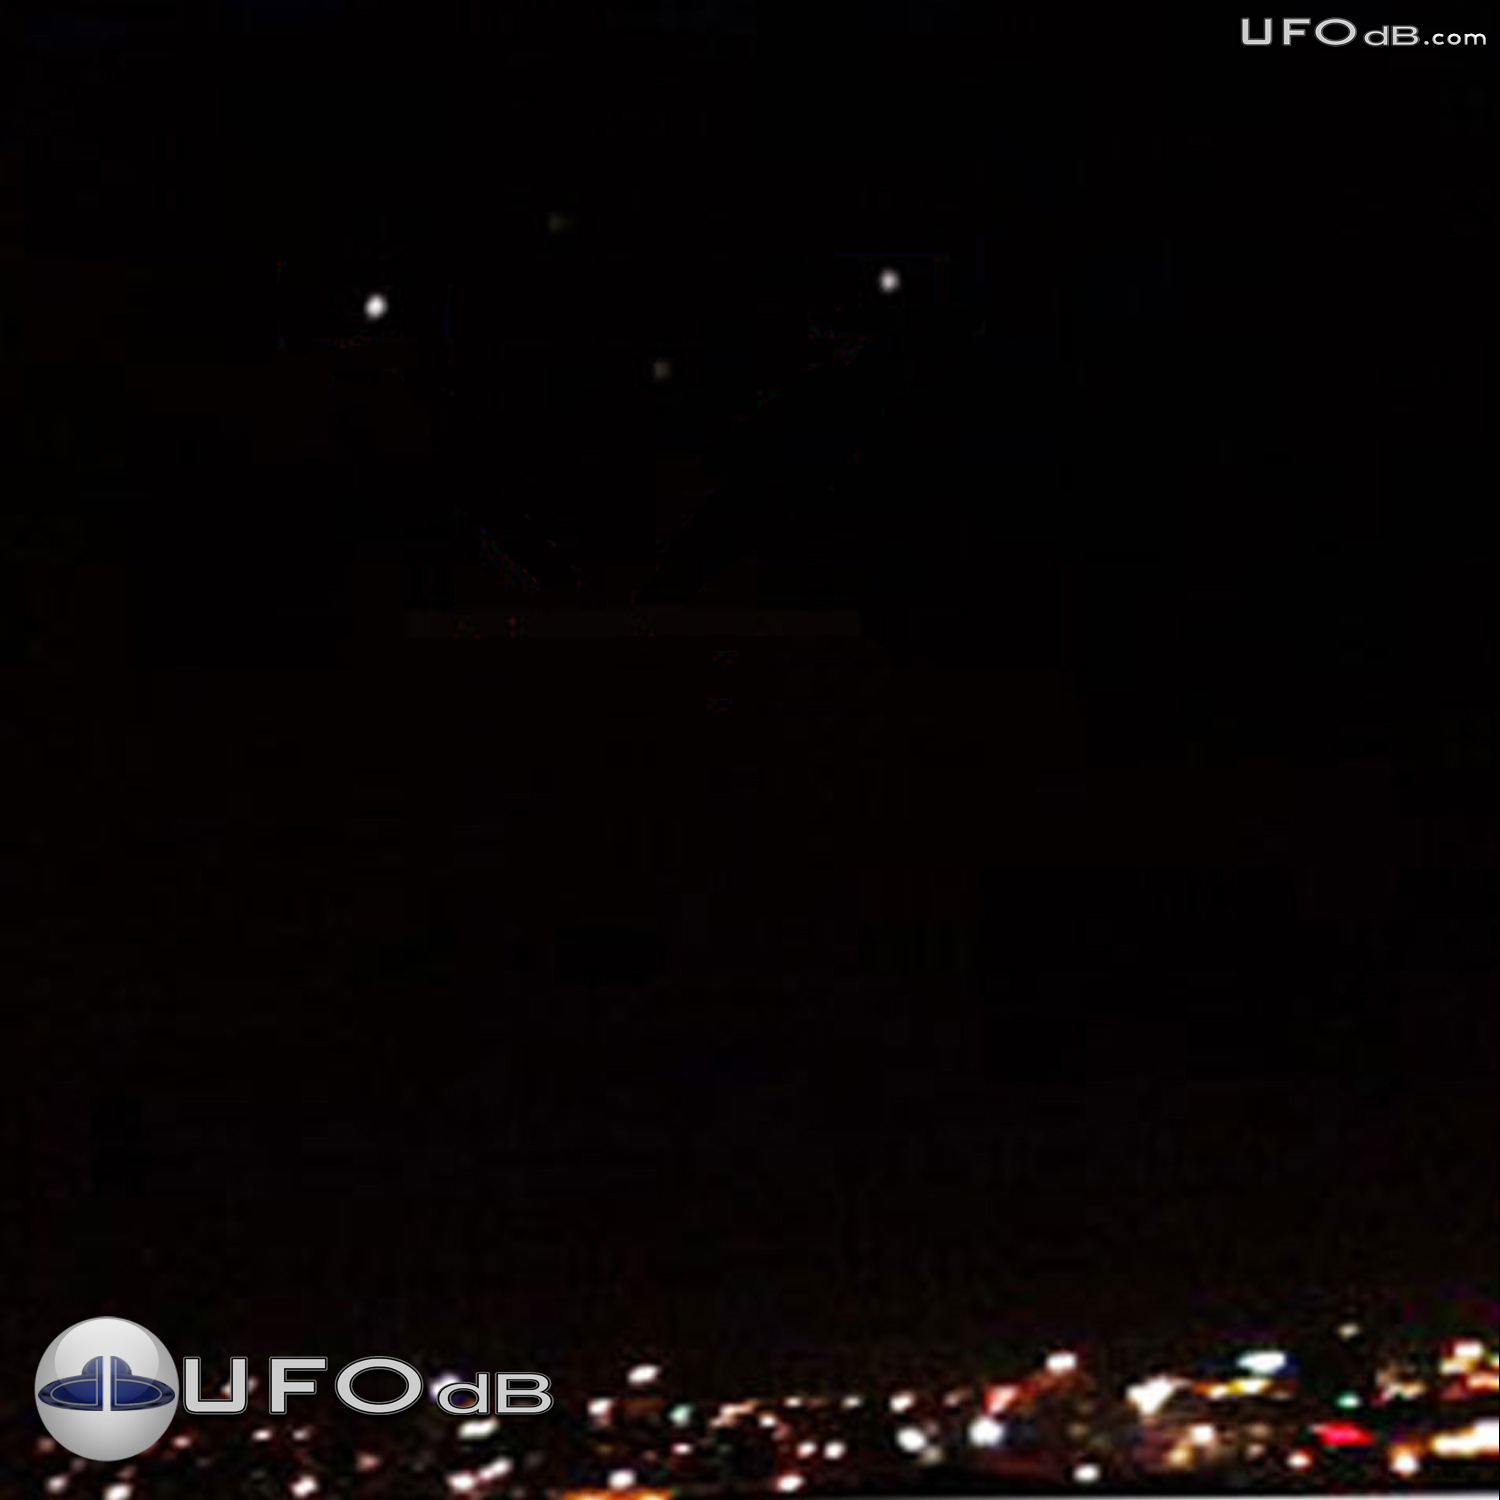 Pulsating Sounds made by Colorful UFOs | Toronto, Canada | May 21 2011 UFO Picture #327-1